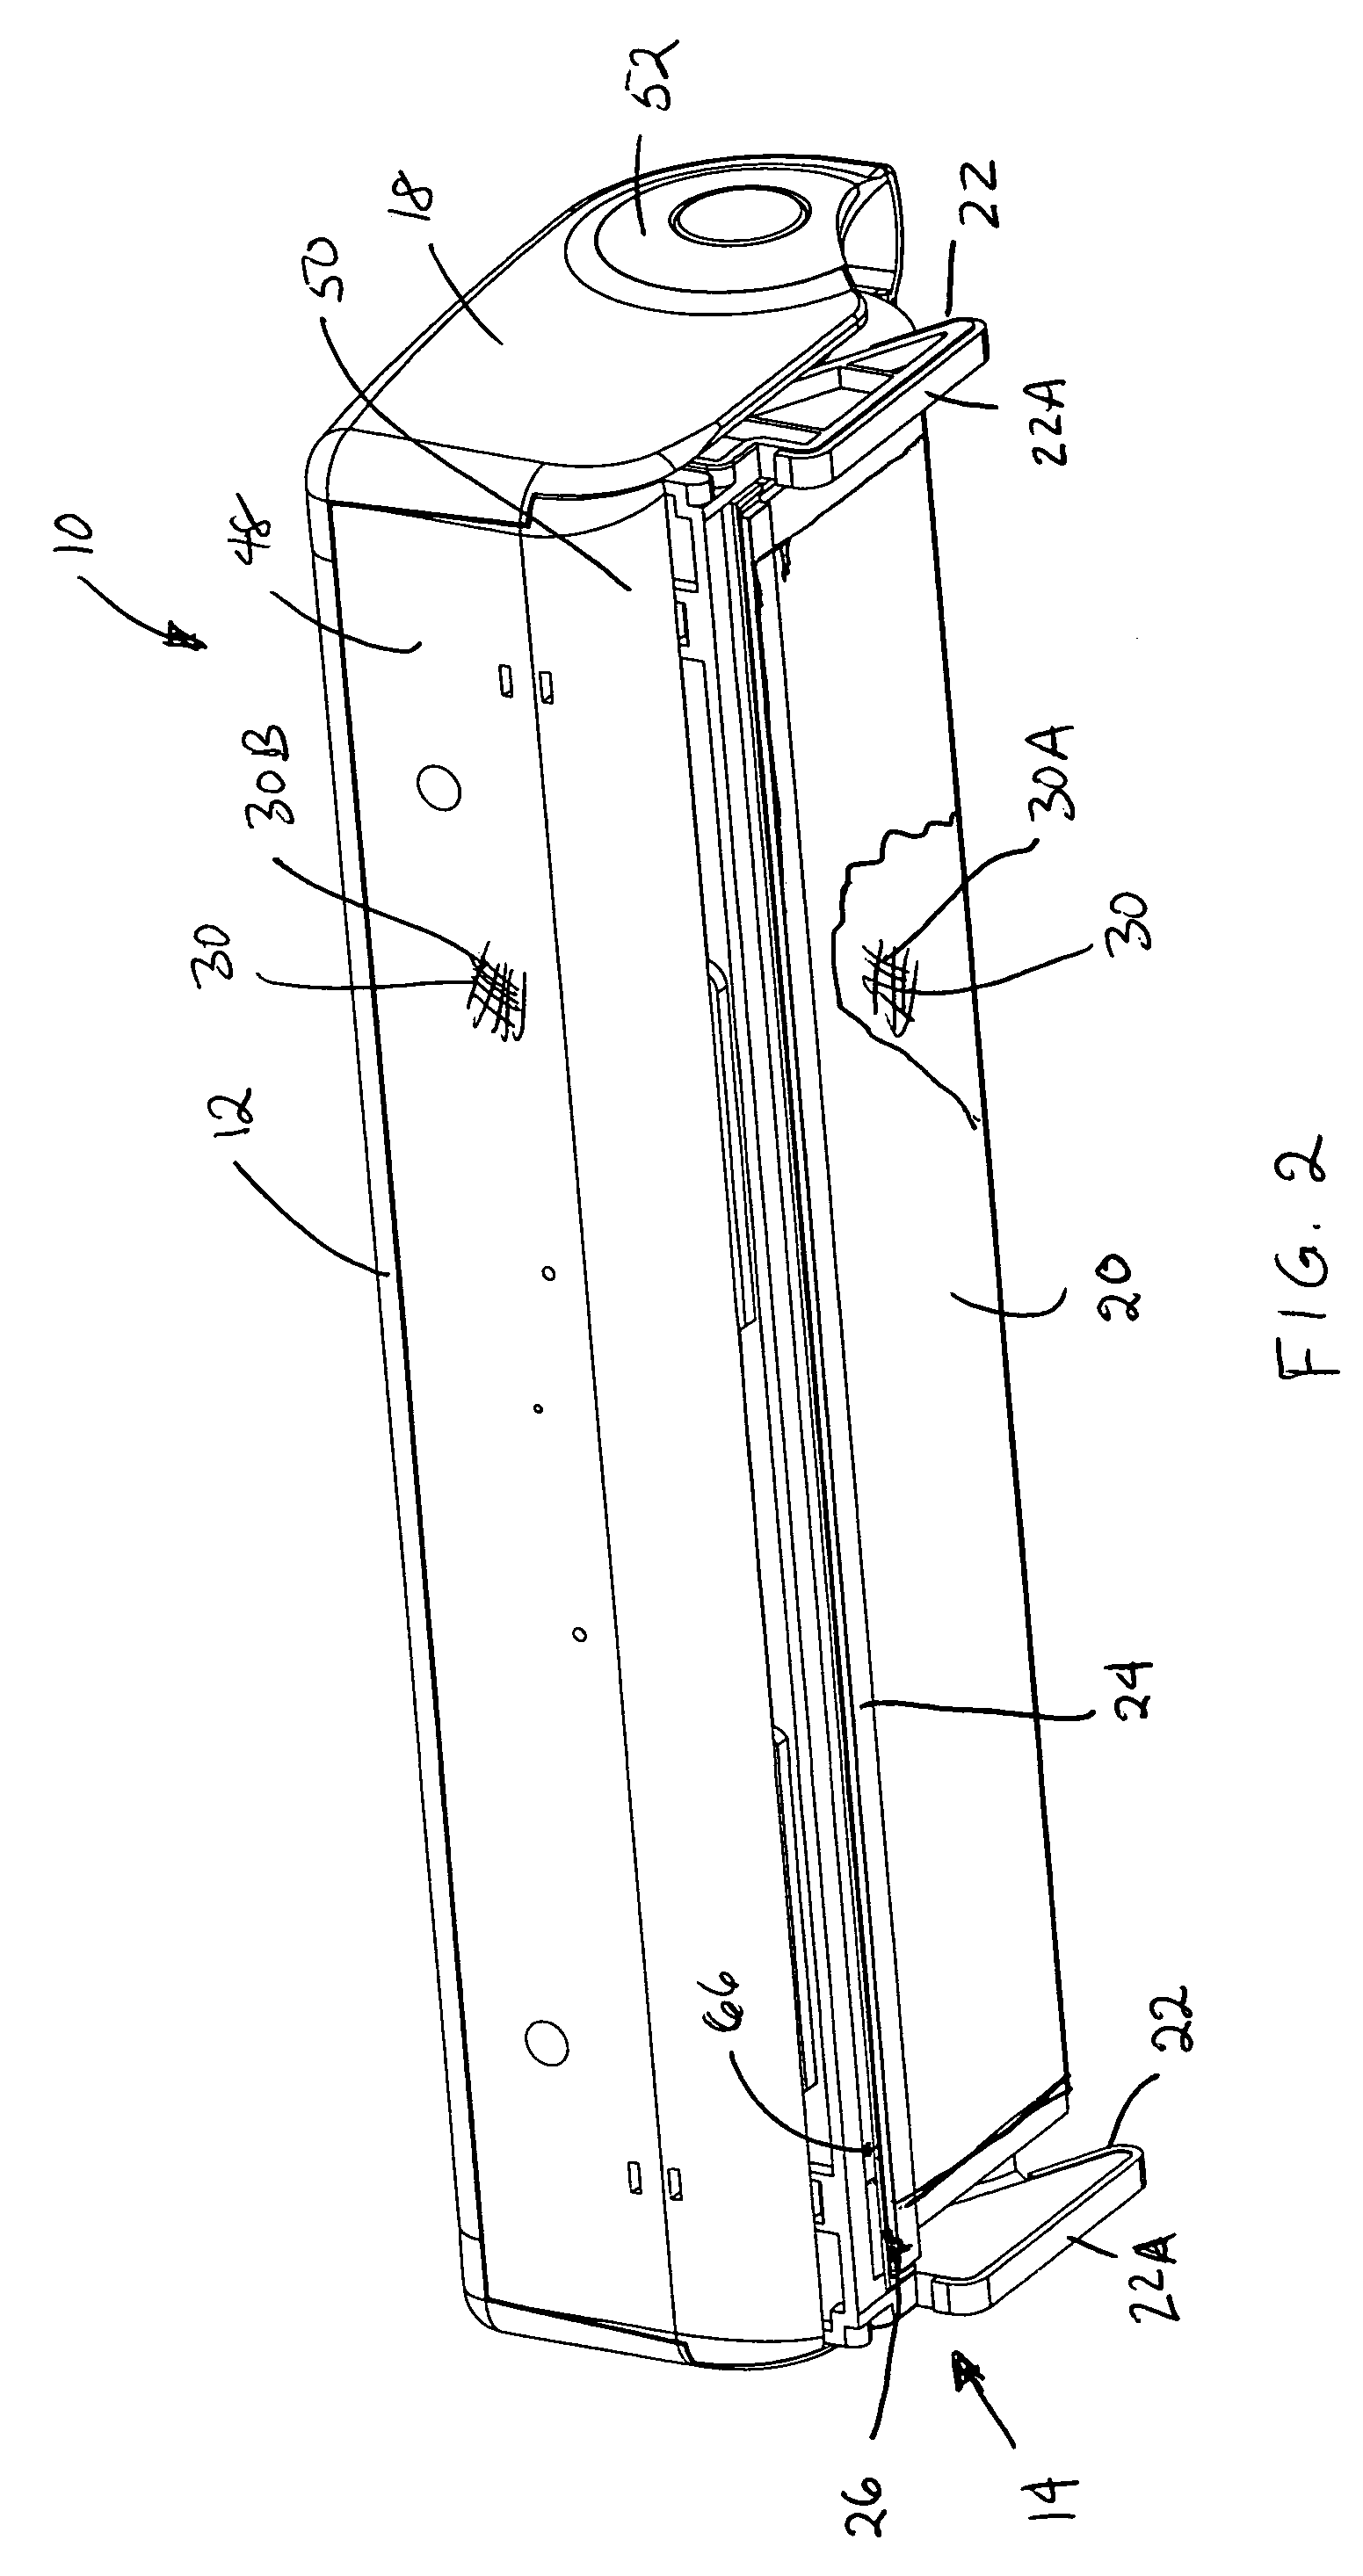 Applicator for and method of applying a sheet material to a substrate